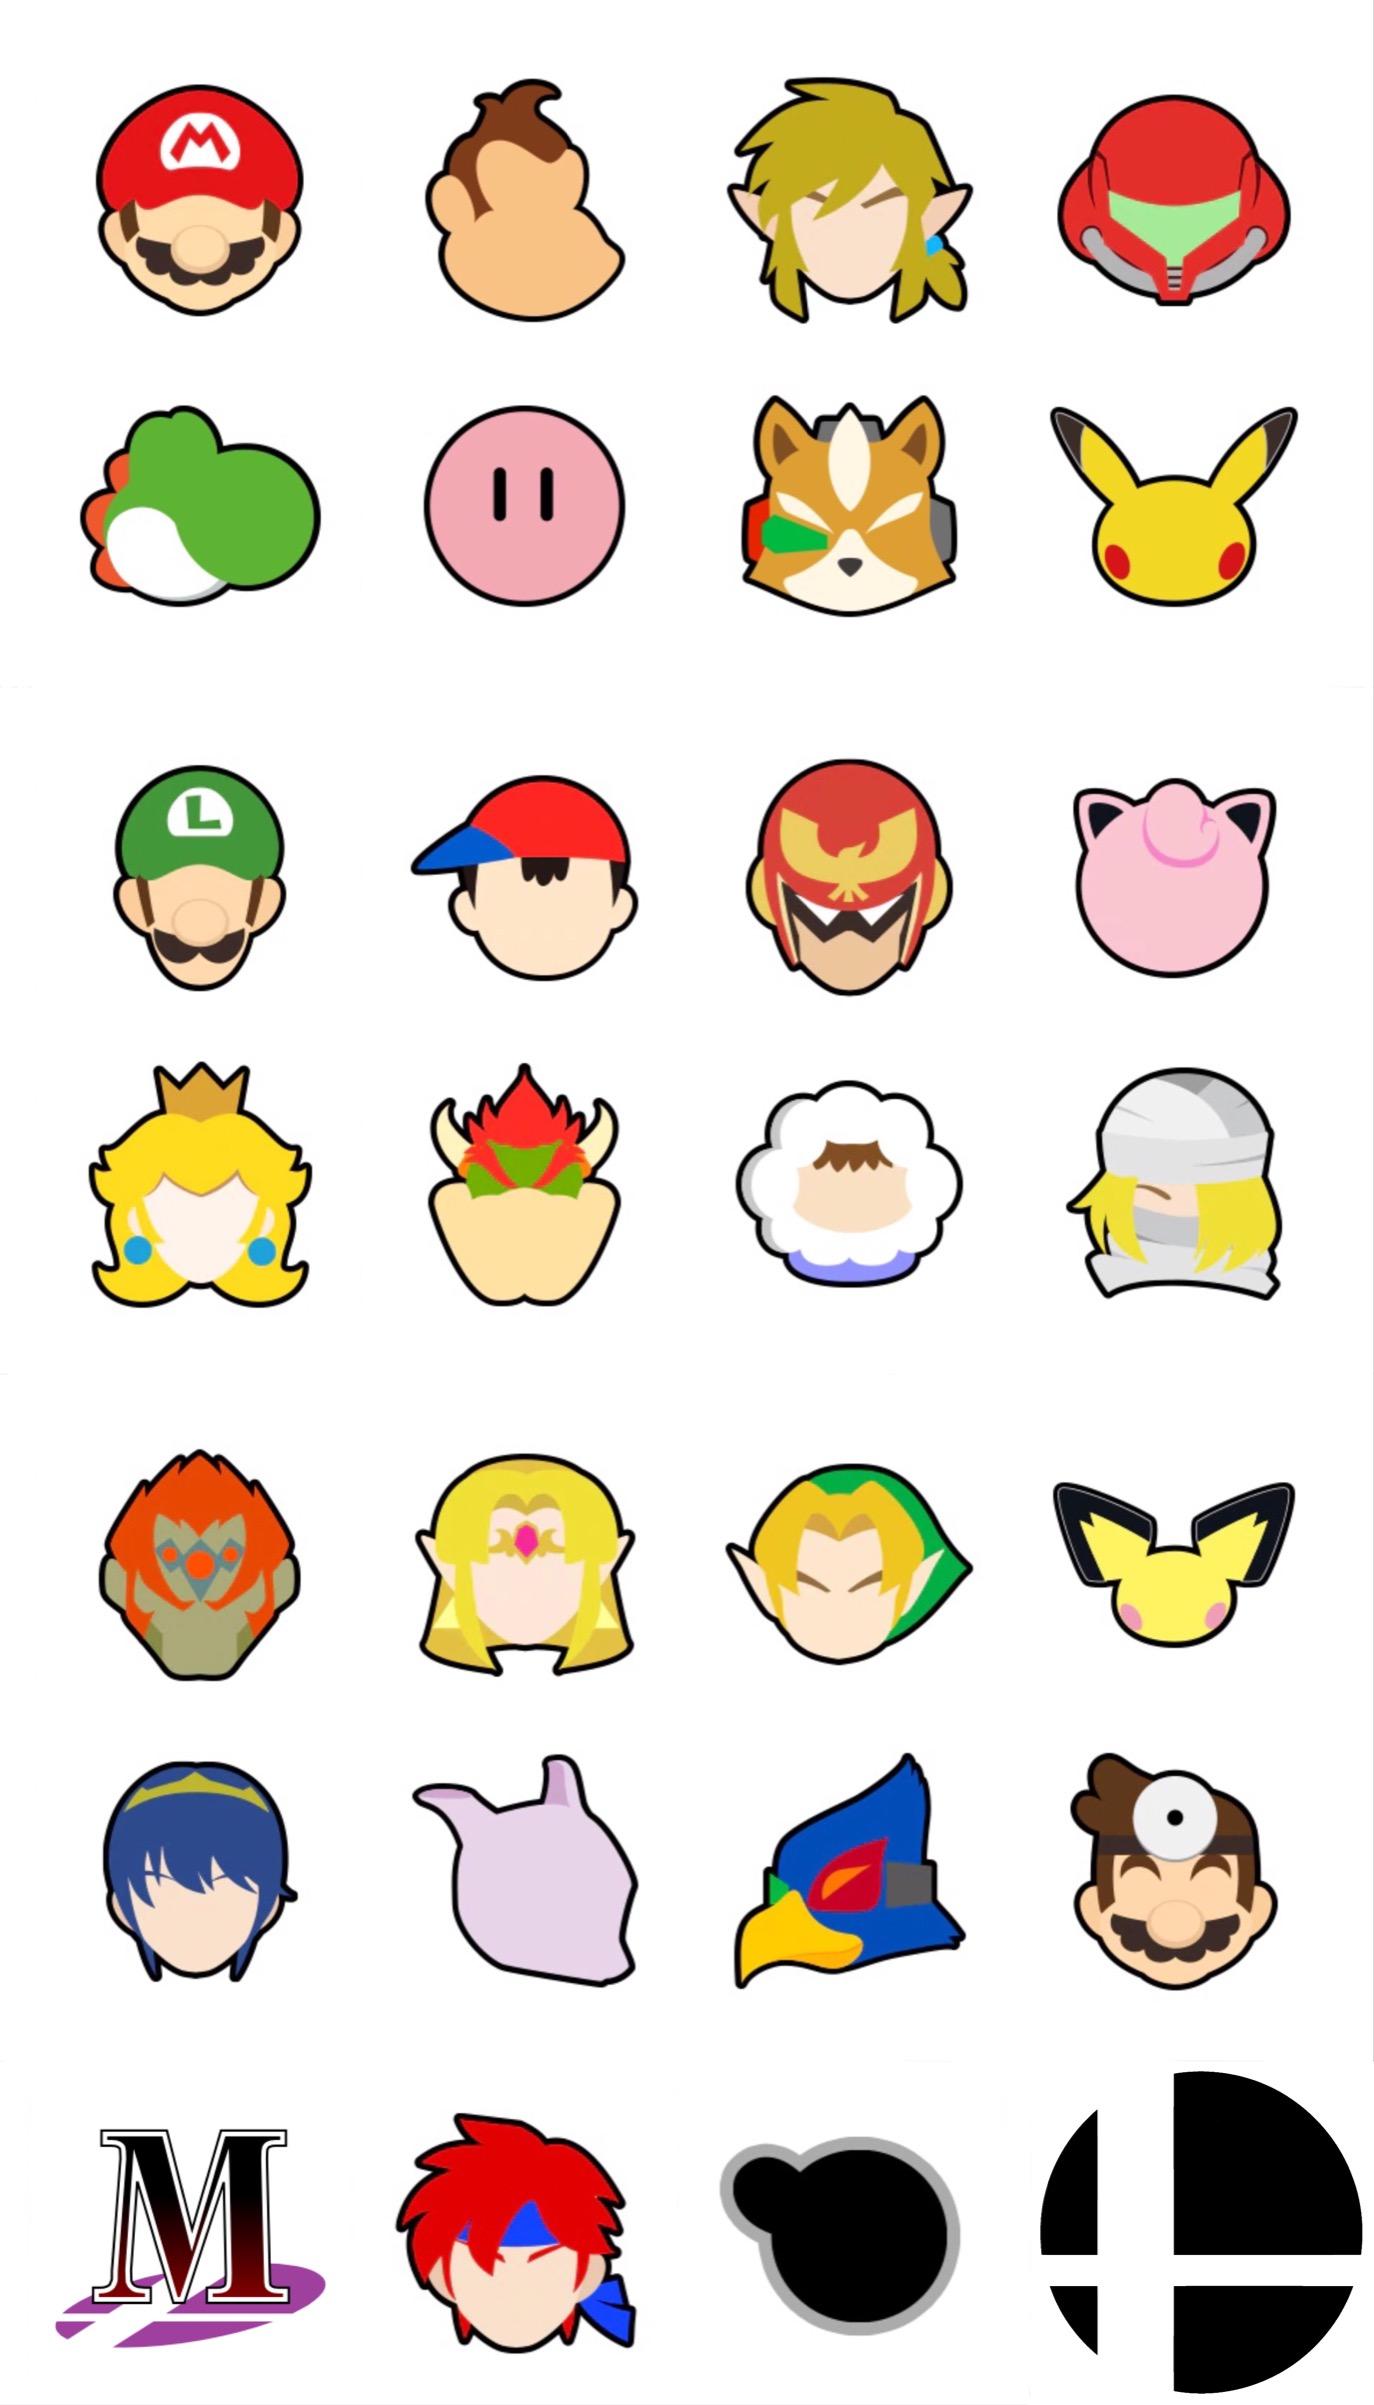 I decided to make a phone wallpaper for Melee using the Ultimate stock icons